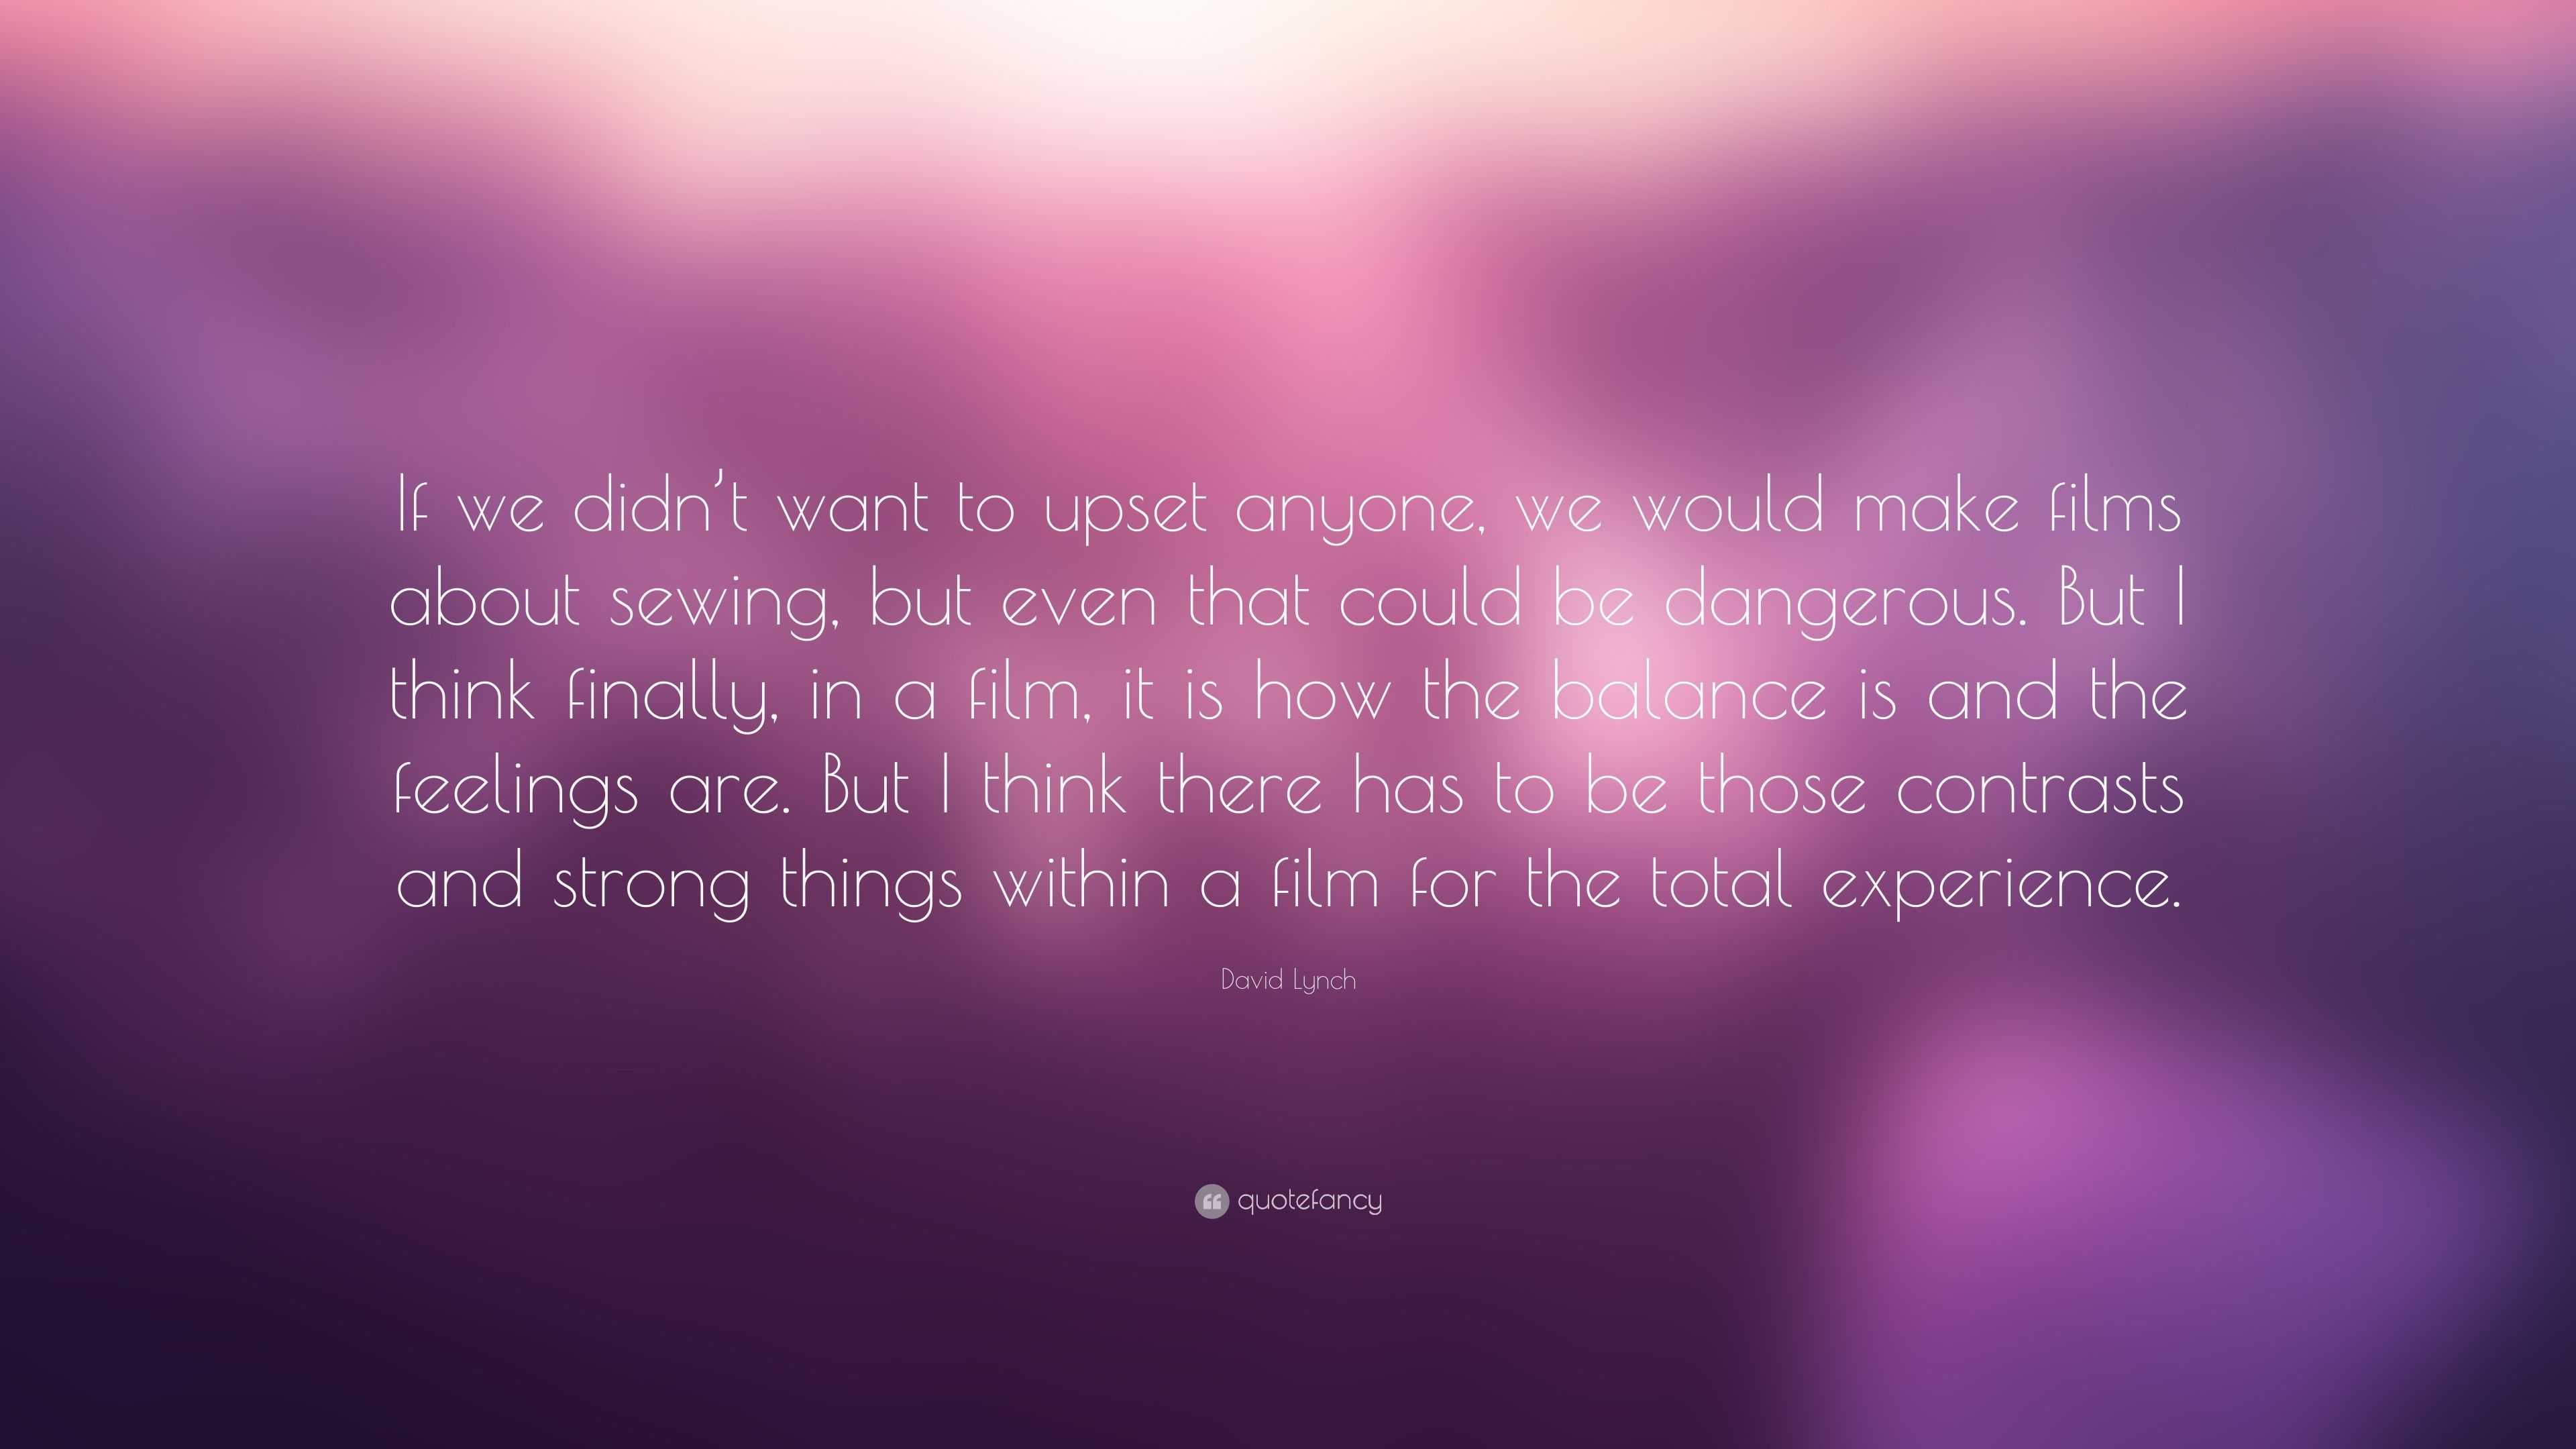 David Lynch Quote: “If we didn’t want to upset anyone, we would make ...